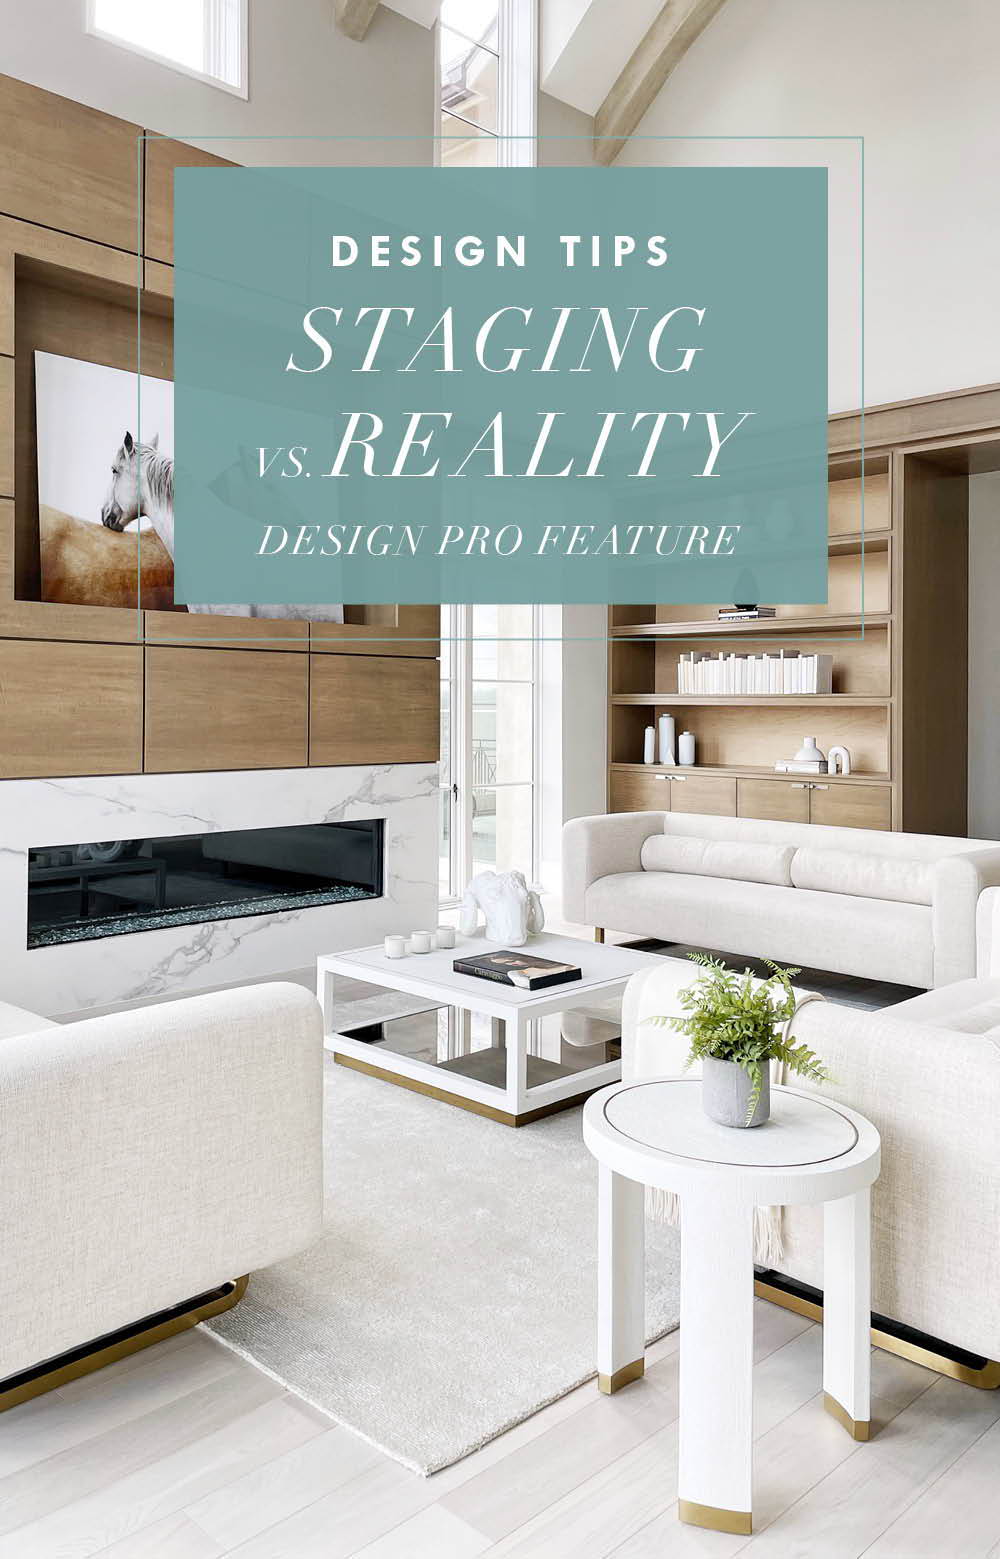 Home Staging to Reality: Design Tips For Show vs. Real Life